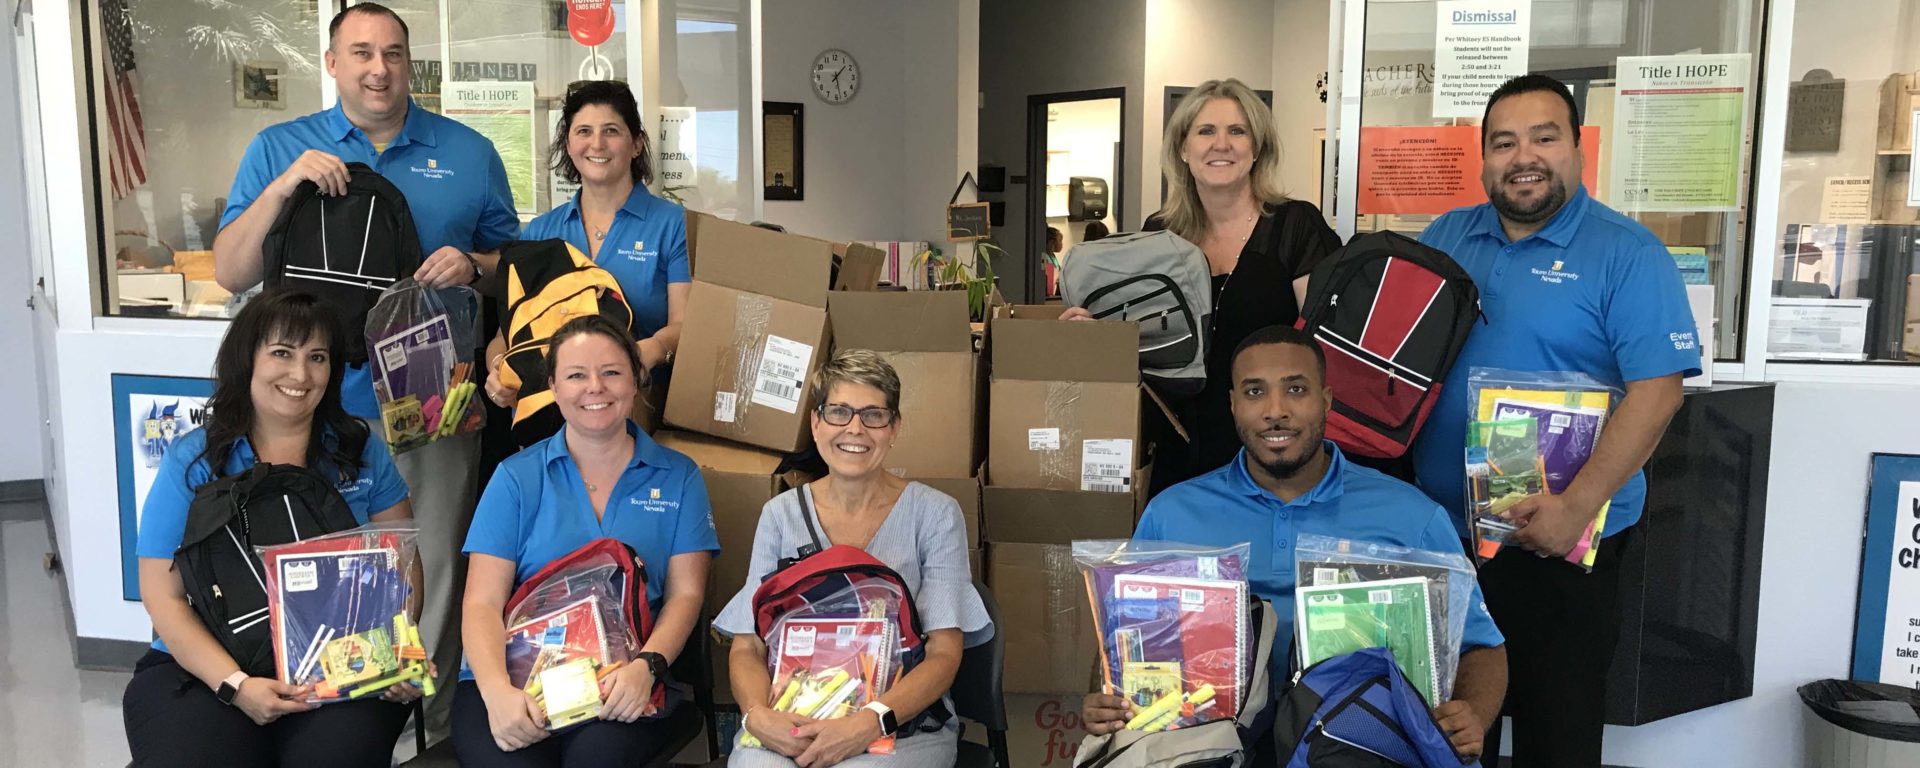 The Touro University Nevada community came together by donating more than $1,400 in school supplies for the underprivileged students at Whitney Elementary School.